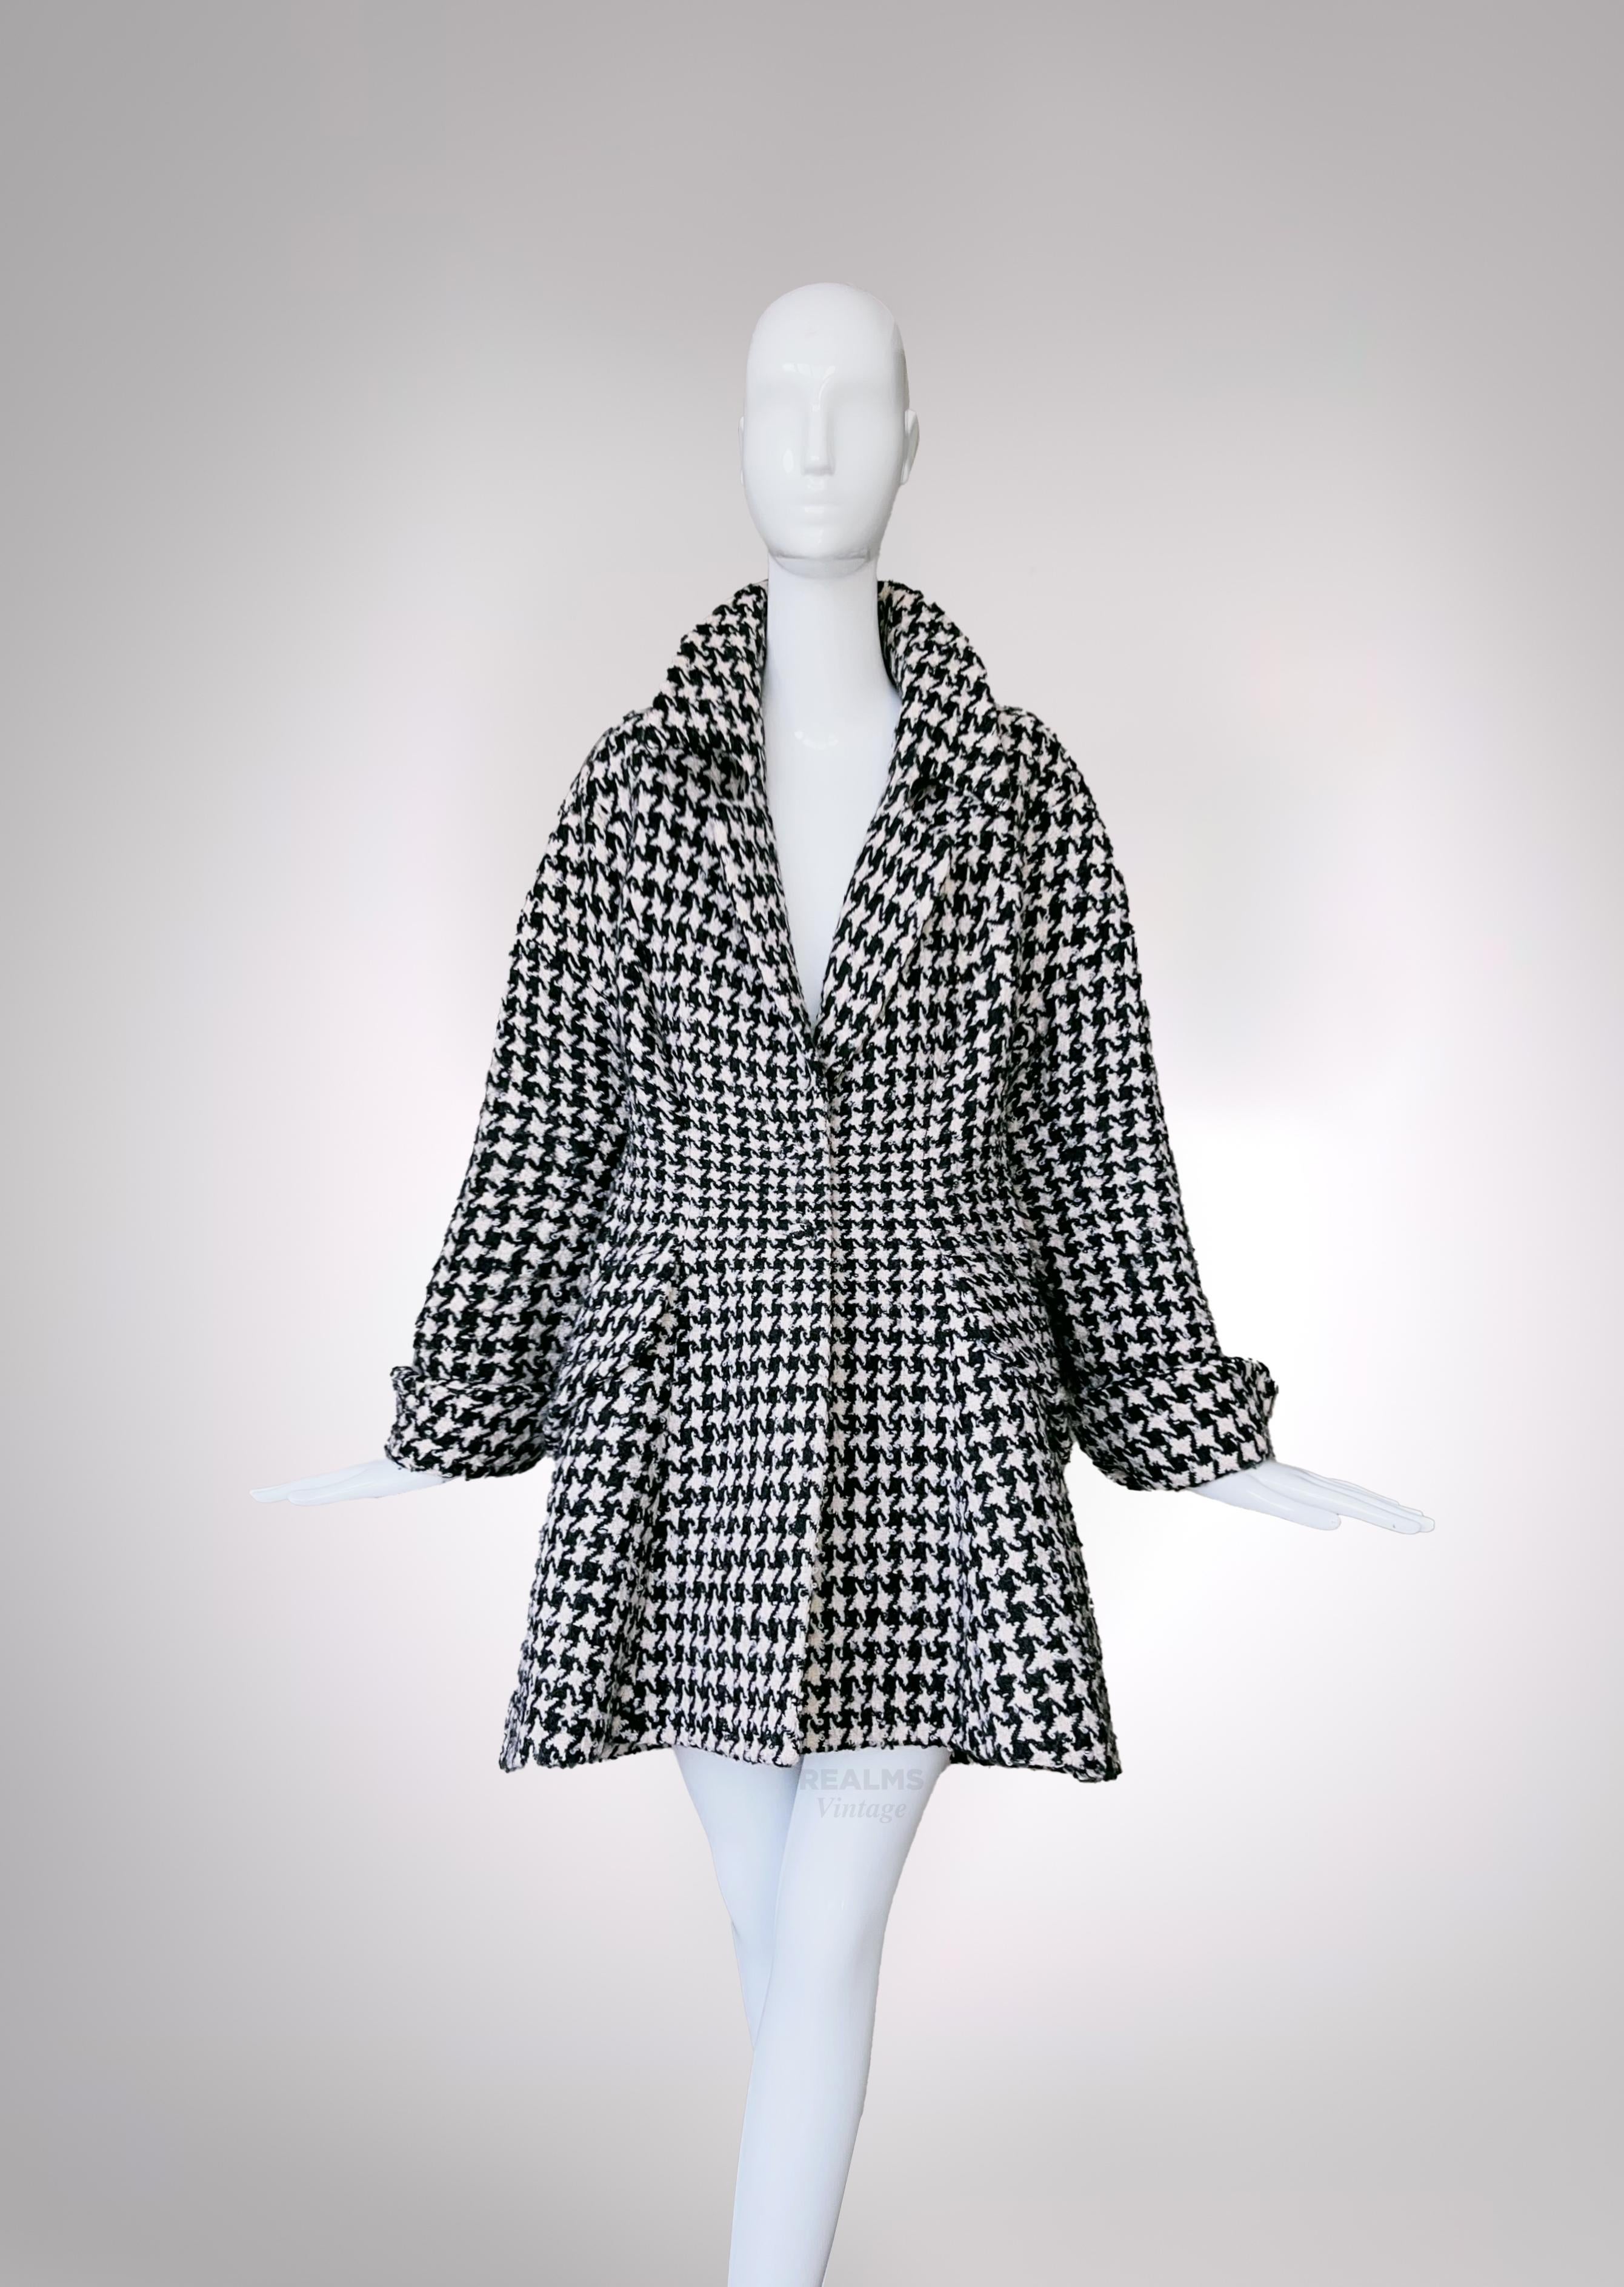 Rare Iconic Thierry Mugler Archival FW1995 Coat Houndstooth Jacket For Sale 1